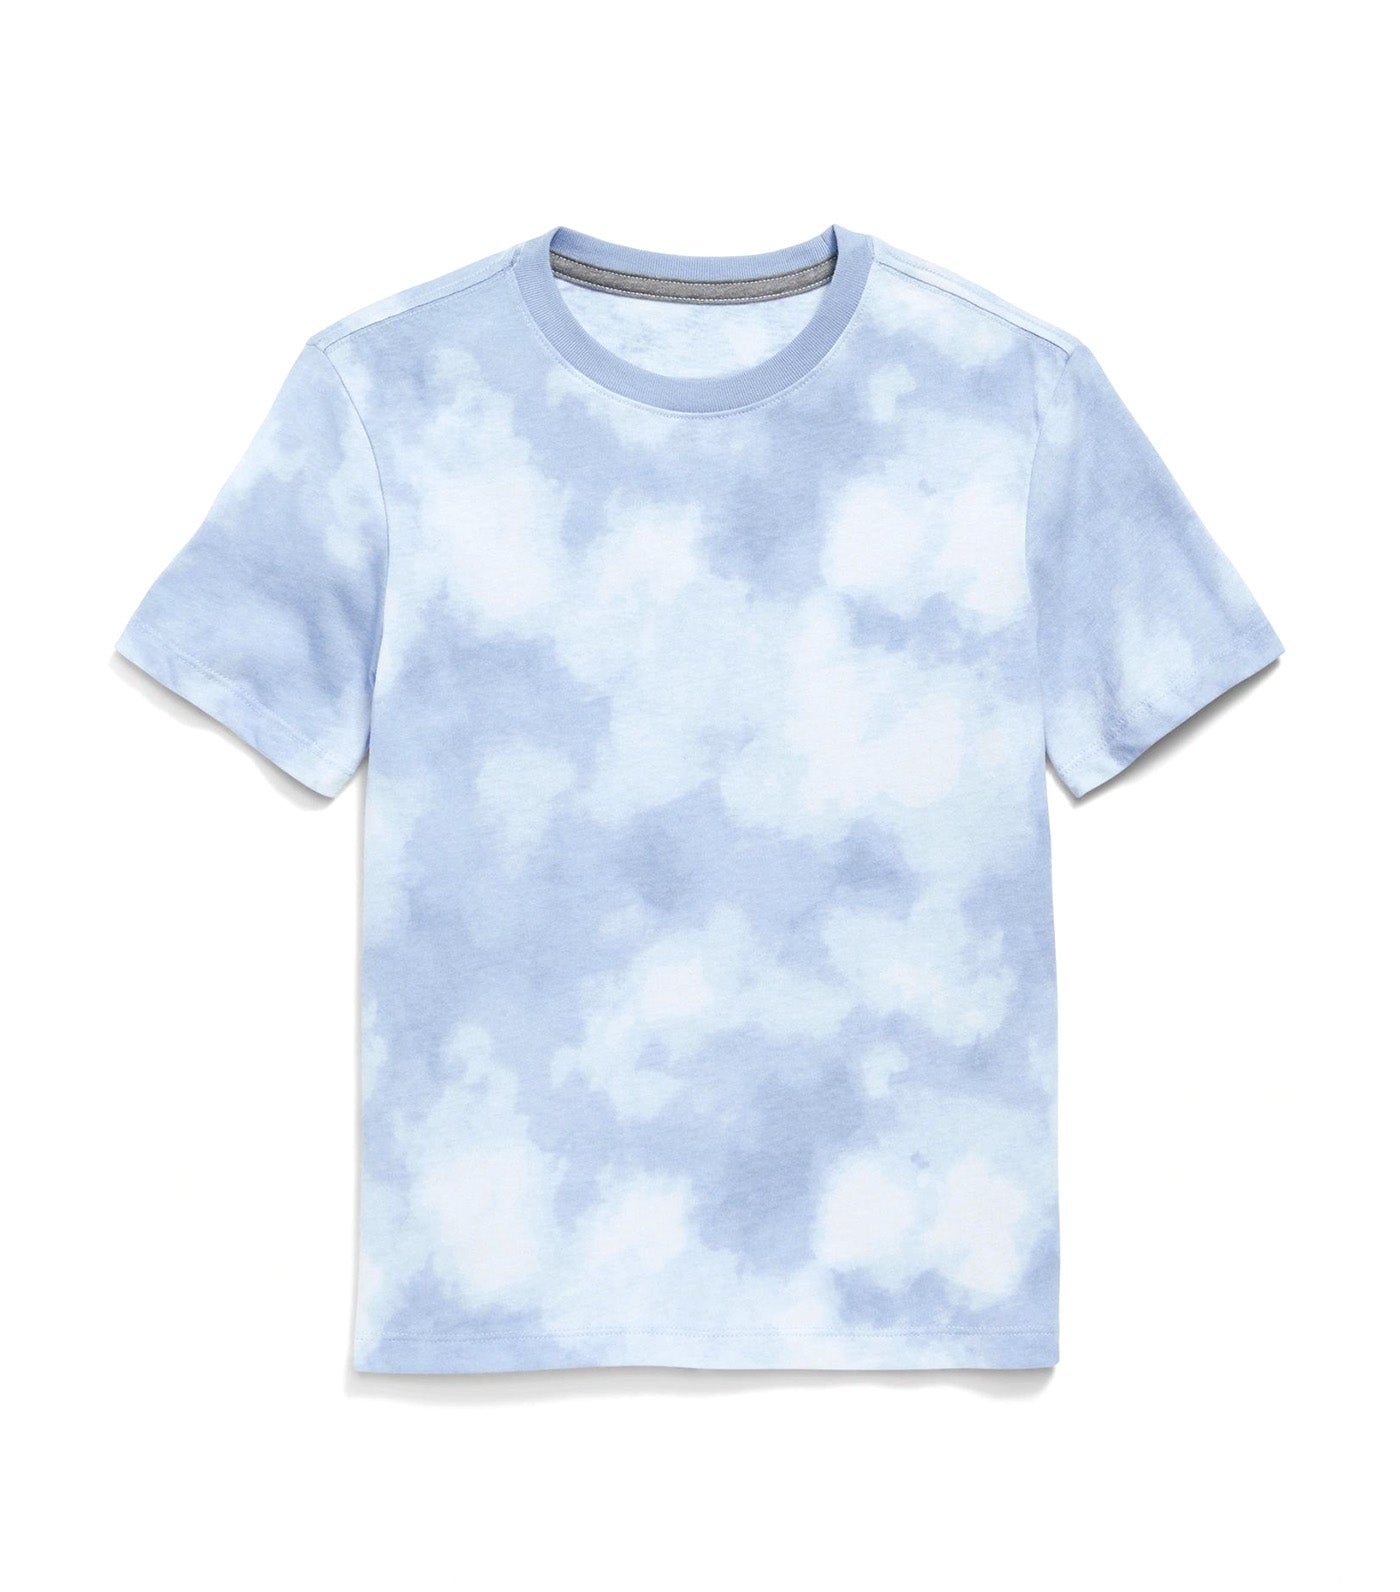 Softest Printed Crew-Neck T-Shirt for Boys Blue Tie Dye